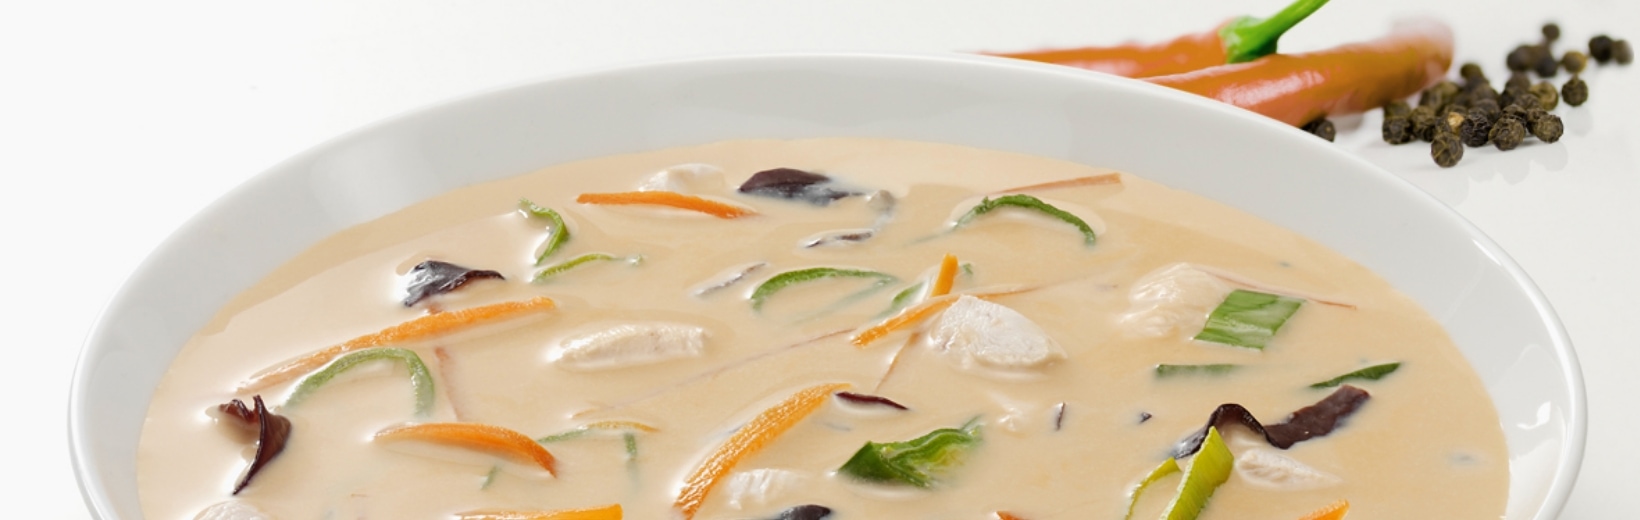 Cocos-Curry Suppe